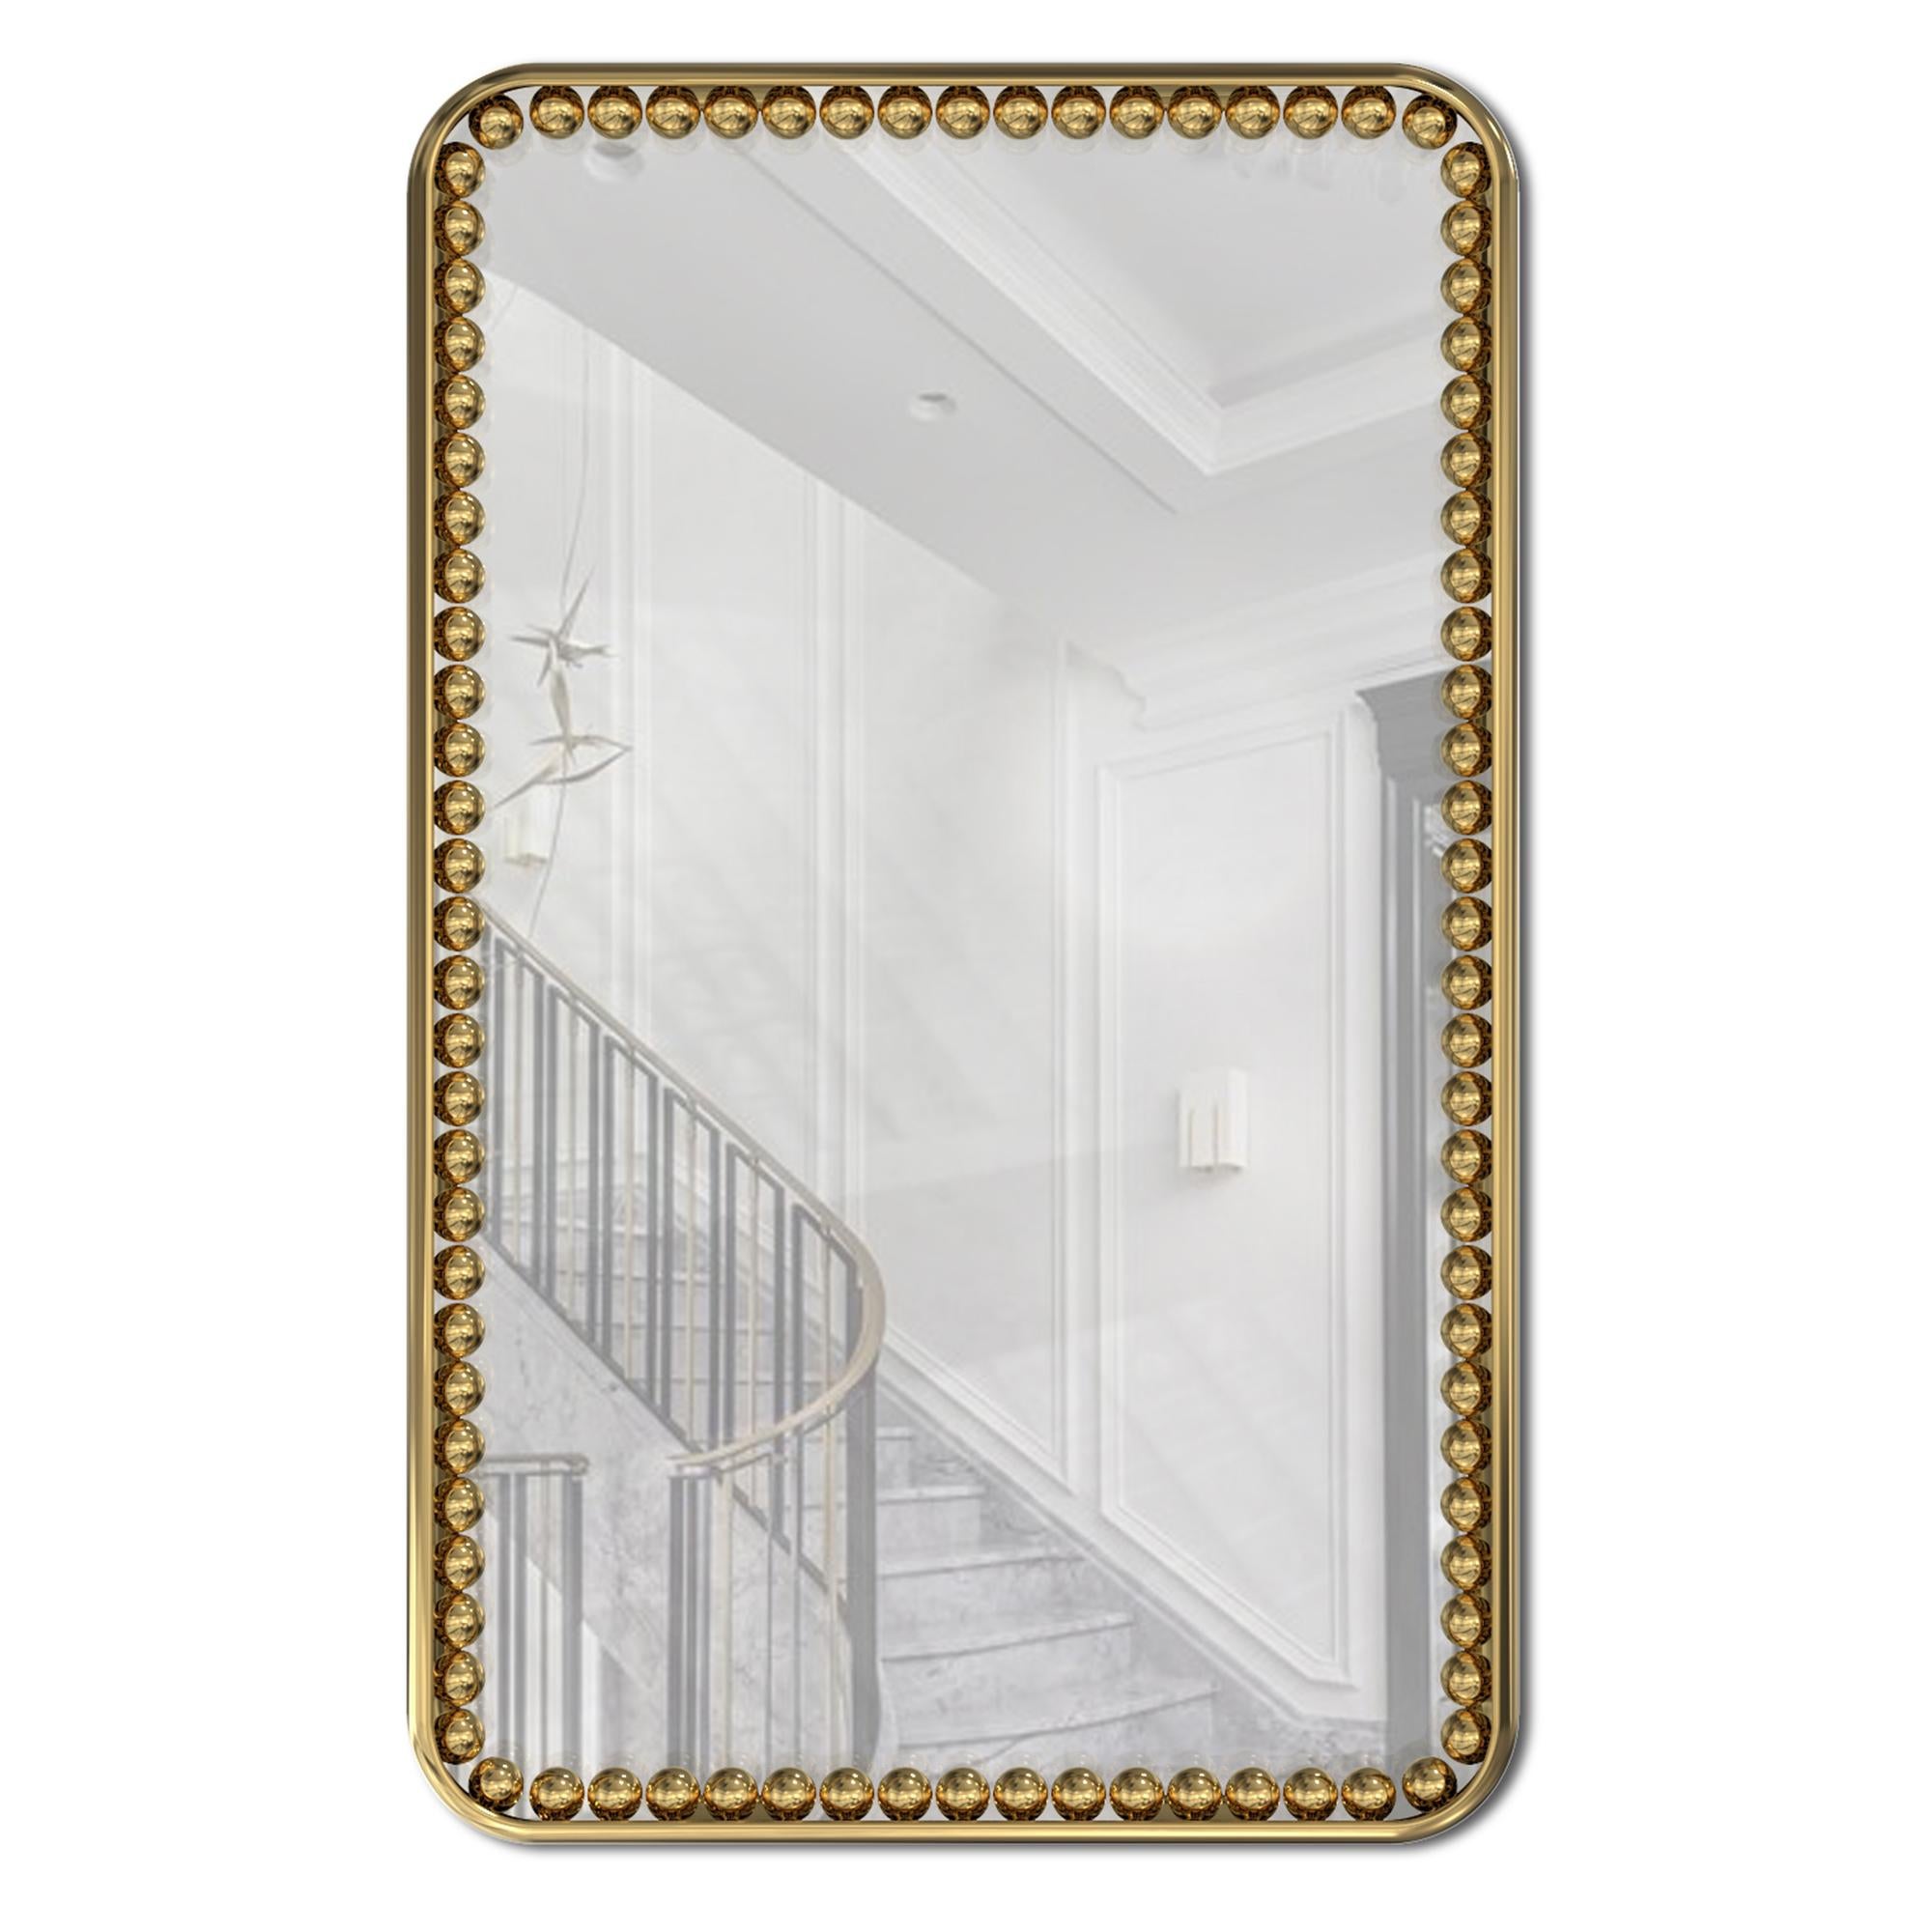 Mirror spheres rectangular with polished
Brass frame and with flat mirror glass.
Also available in spheres round mirror.